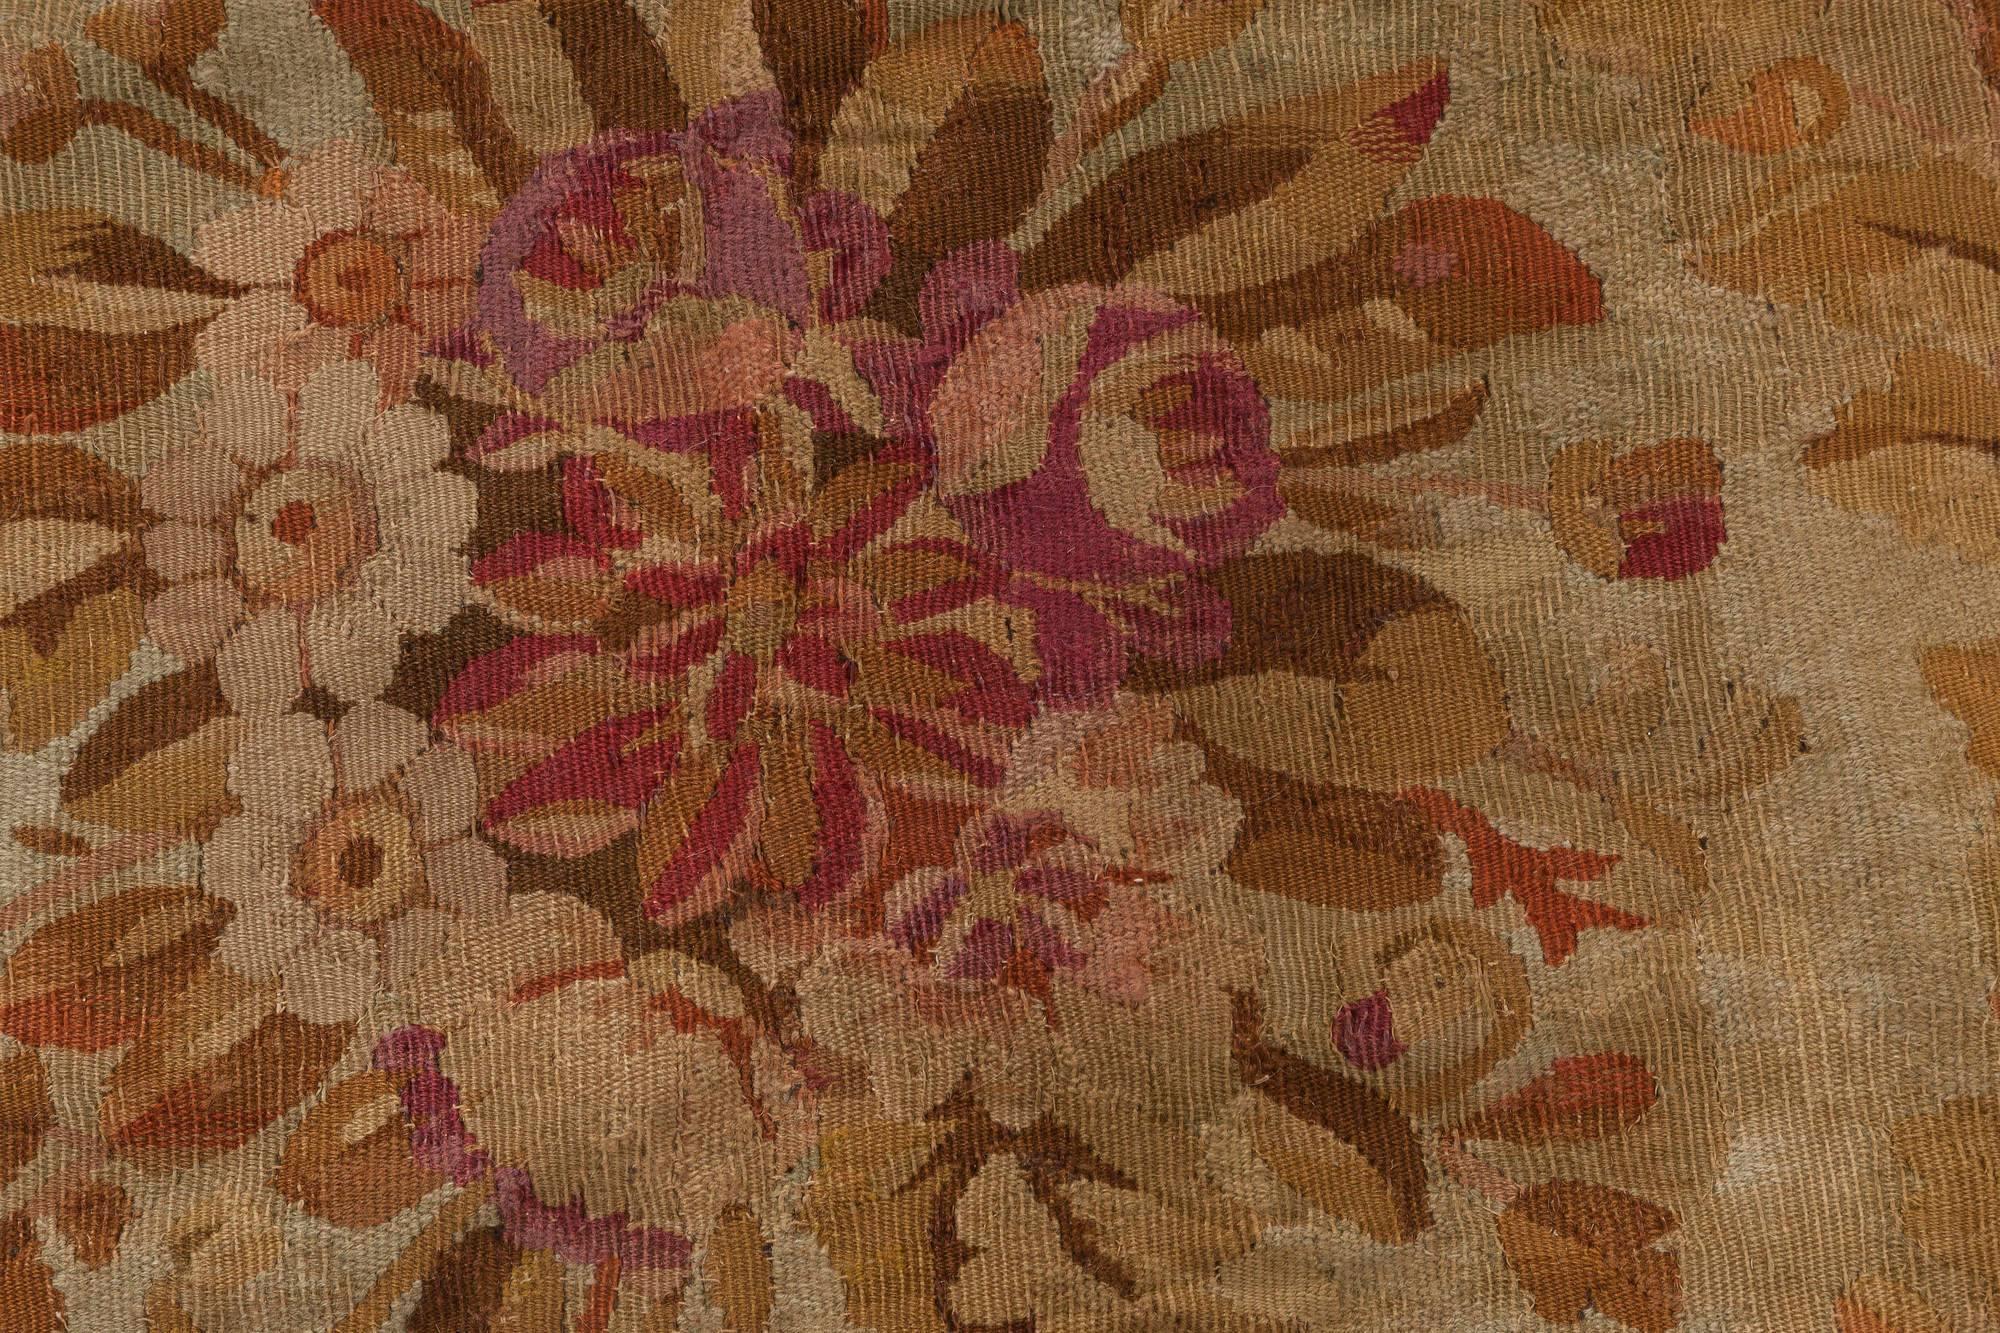 Antique French Aubusson Rug
Size: 7'6